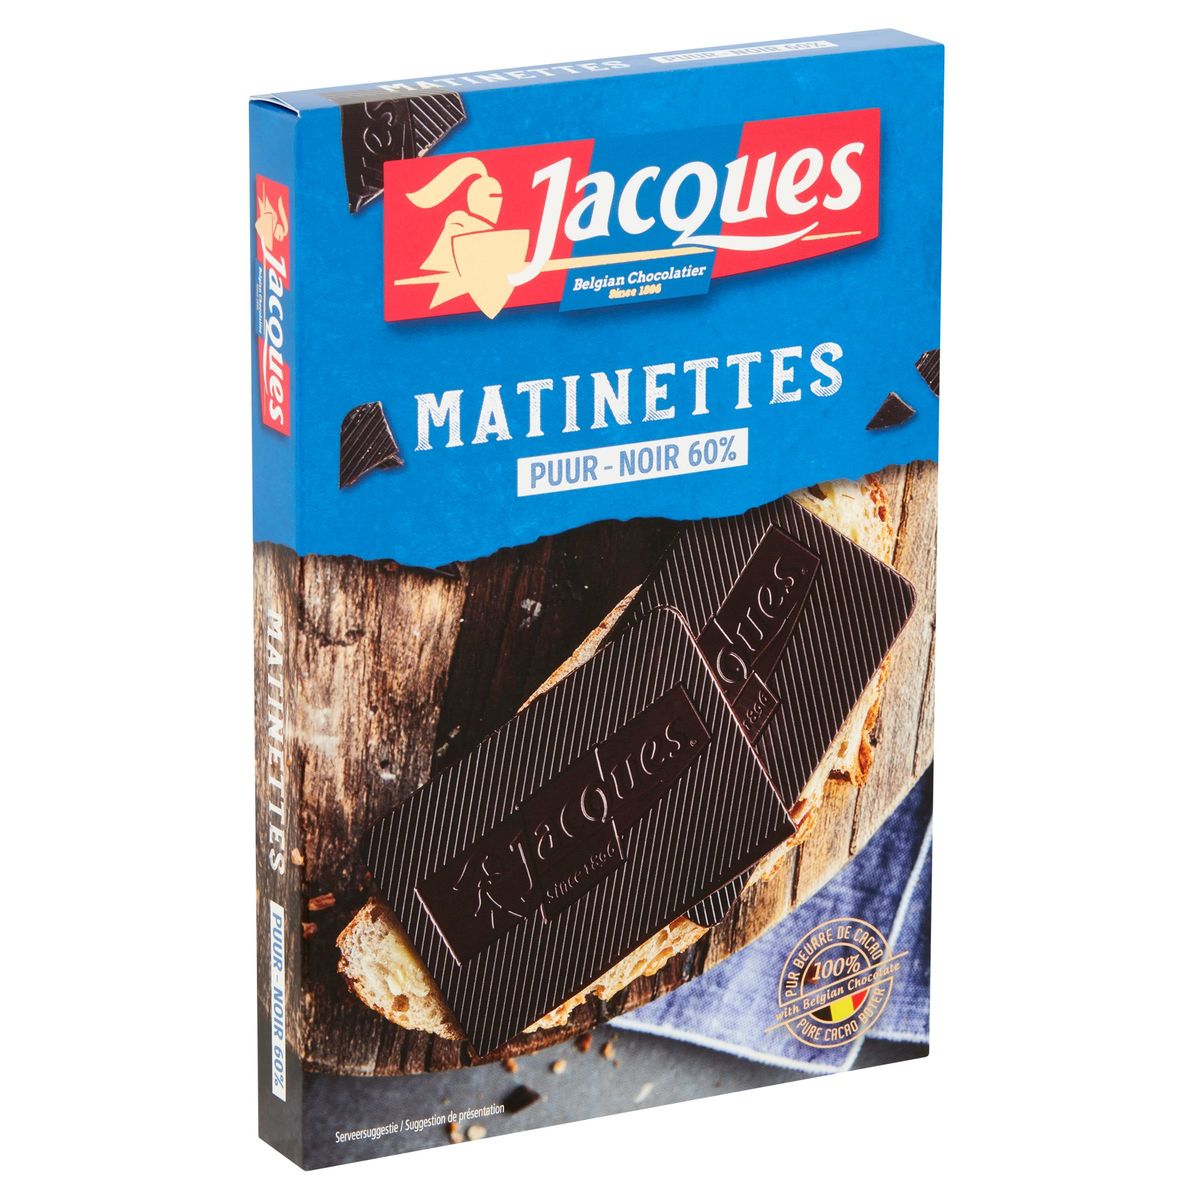 Jacques Matinettes Puur 60% 128 g